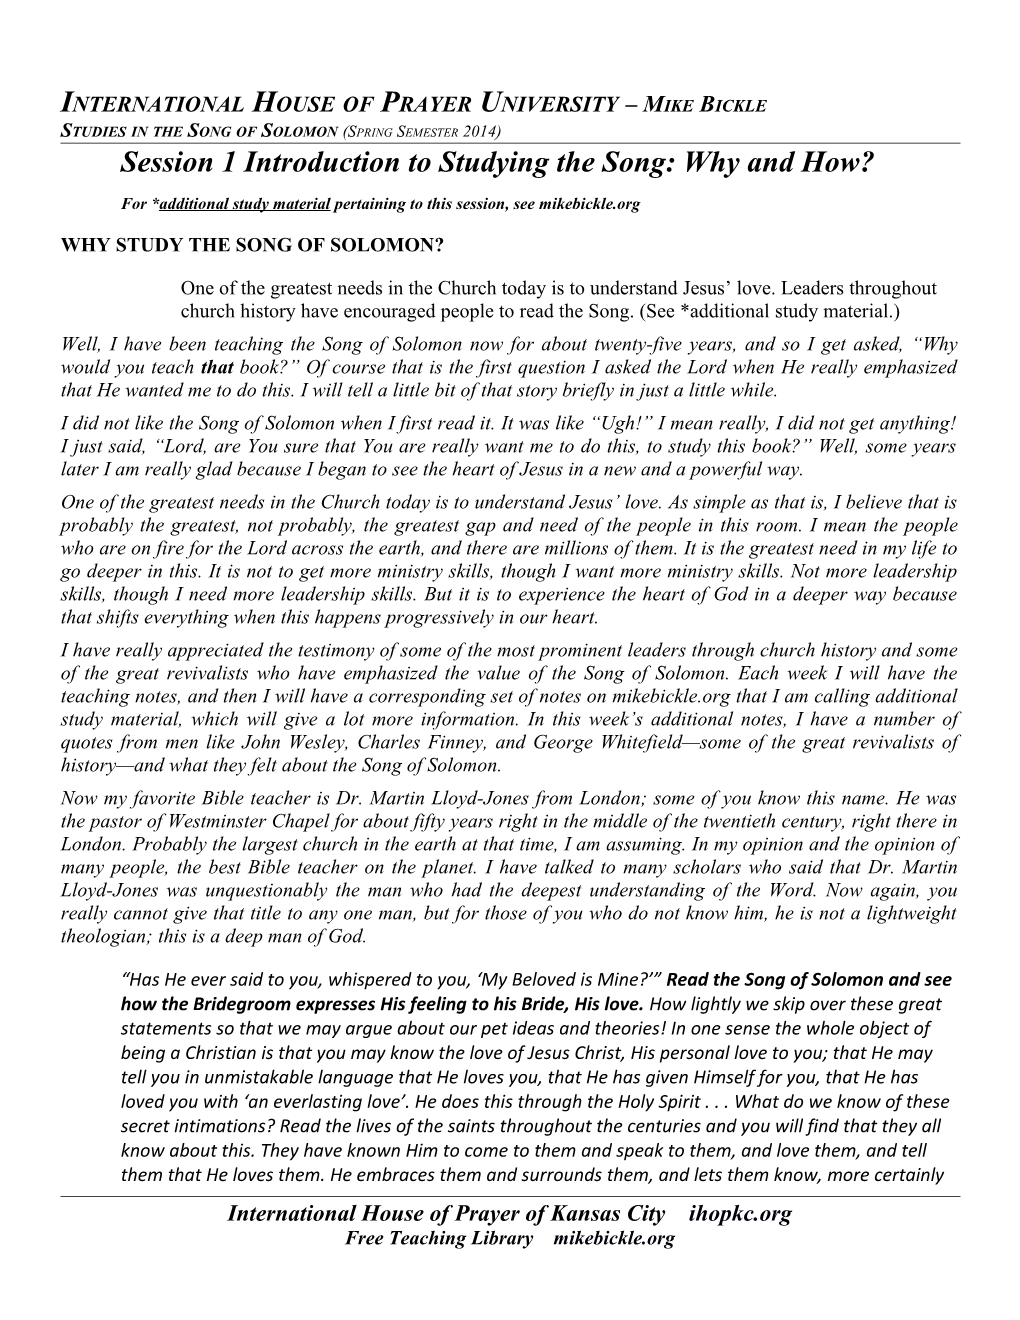 Session 1 Introduction to Studying the Song: Why and How?